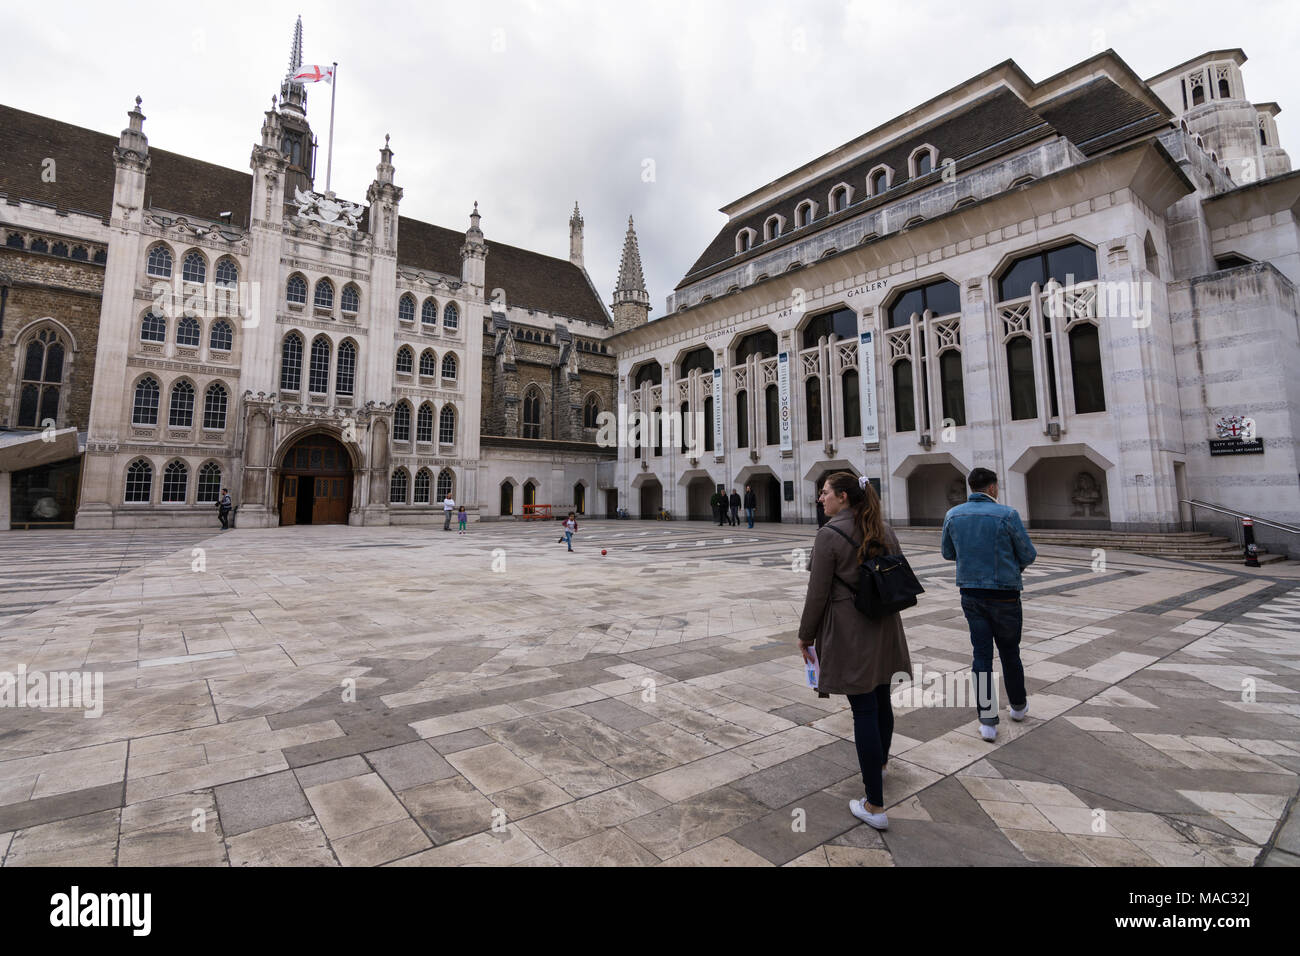 Guildhall, City of London, England. Courtyard, Art Gallery and Historical Town Hall Stock Photo